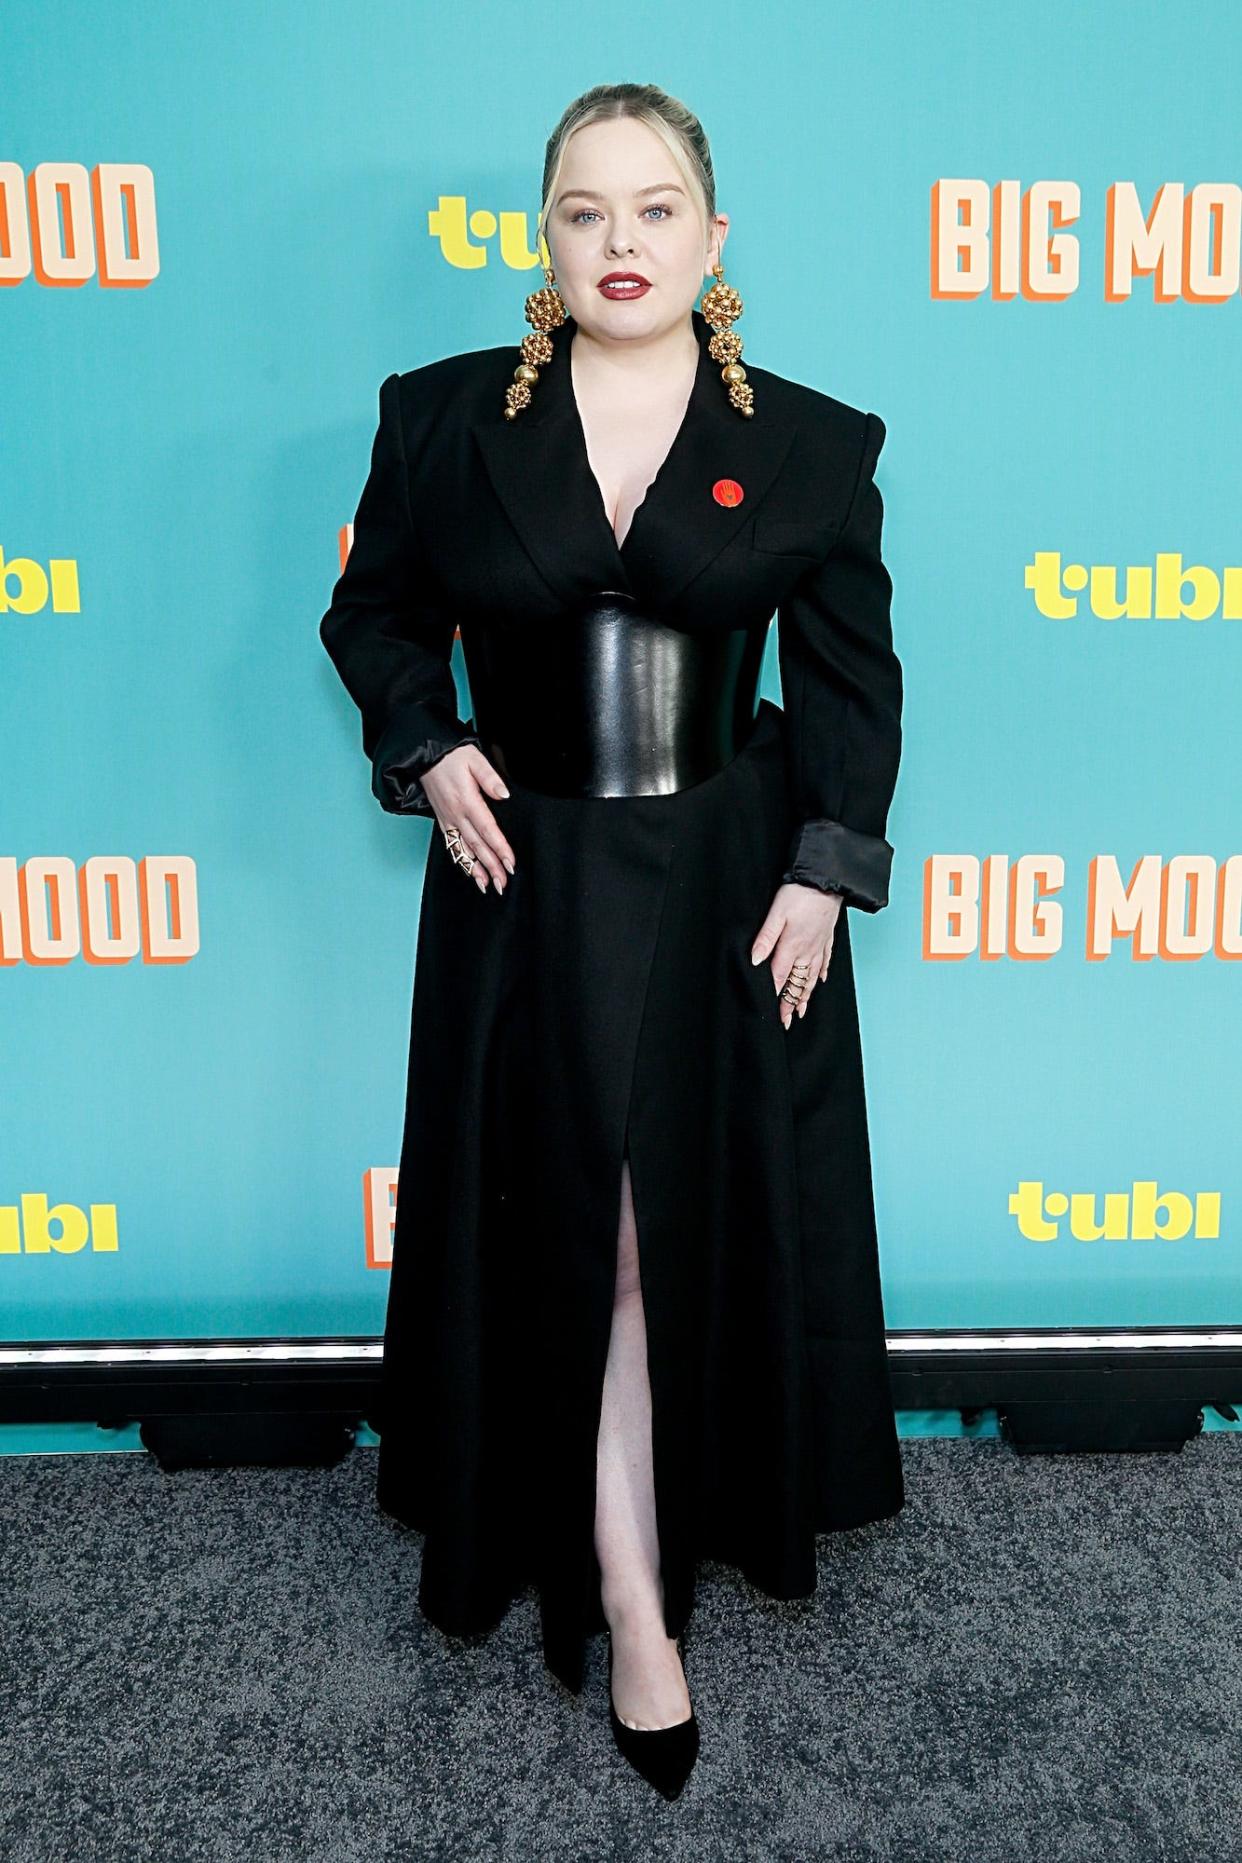 Nicola Coughlan attends a "Big Mood" screening in New York City.